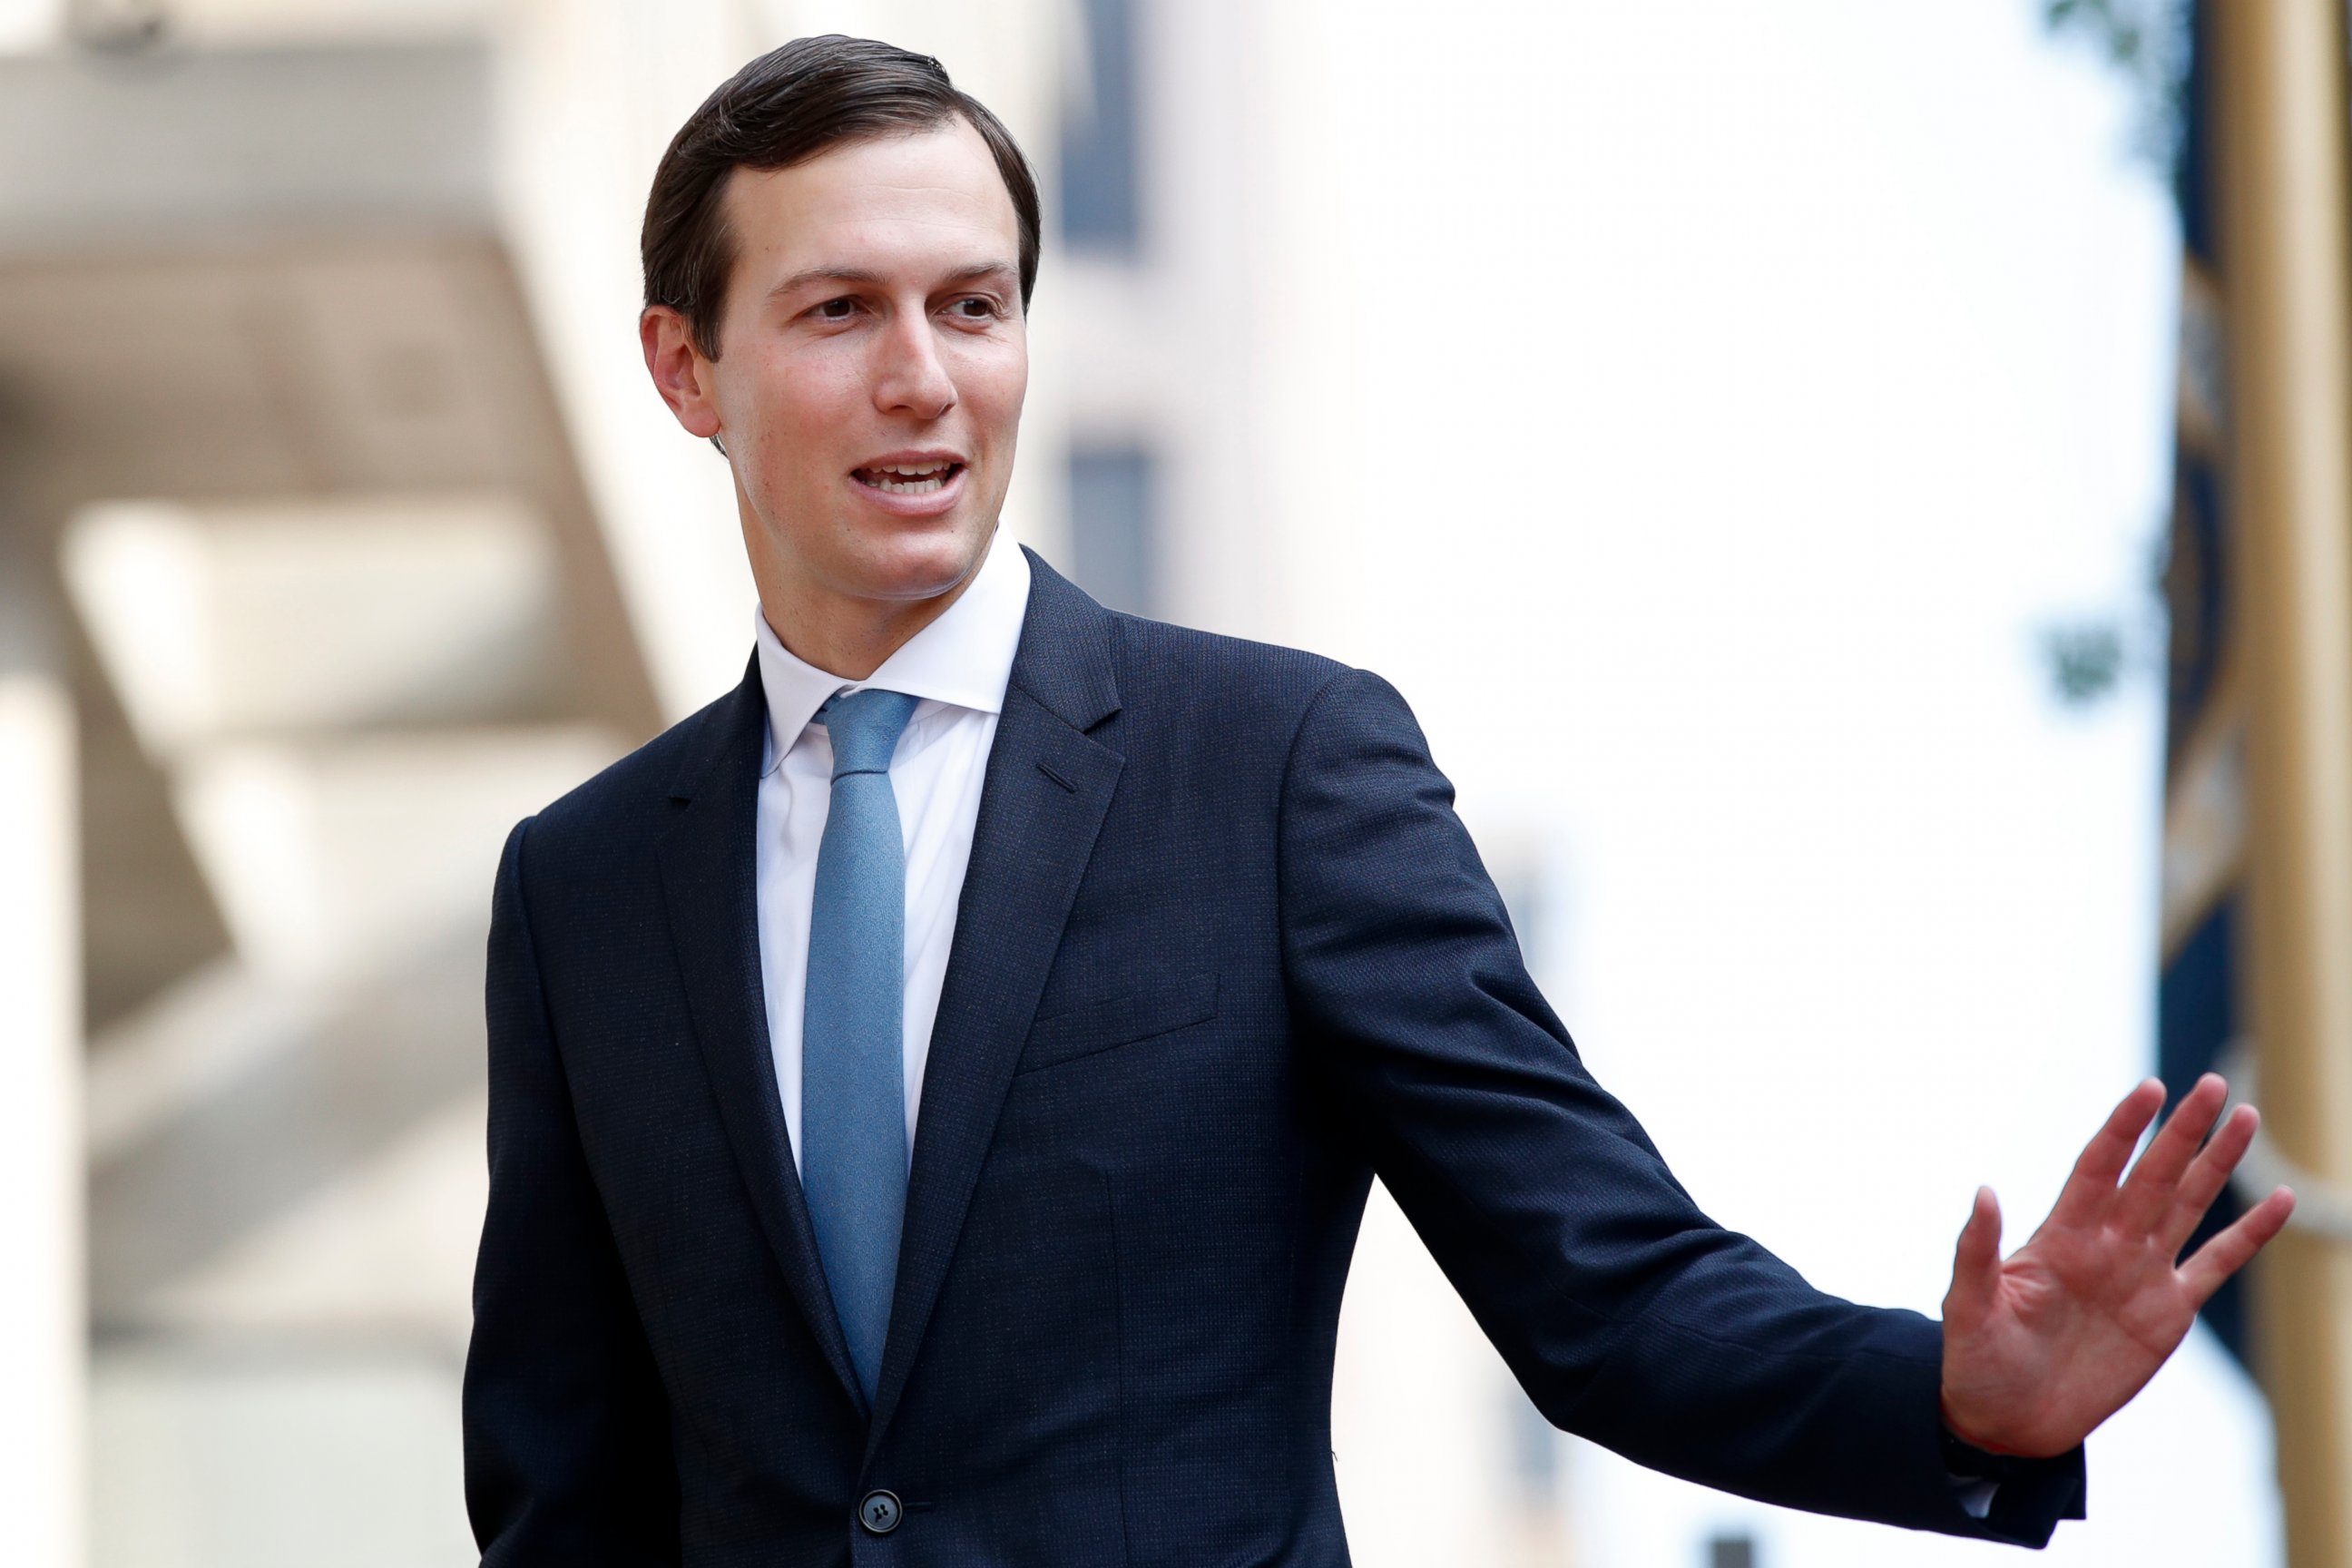 In this Aug. 29, 2018, file photo, White House Adviser Jared Kushner waves as he arrives at the Office of the United States Trade Representative in Washington.